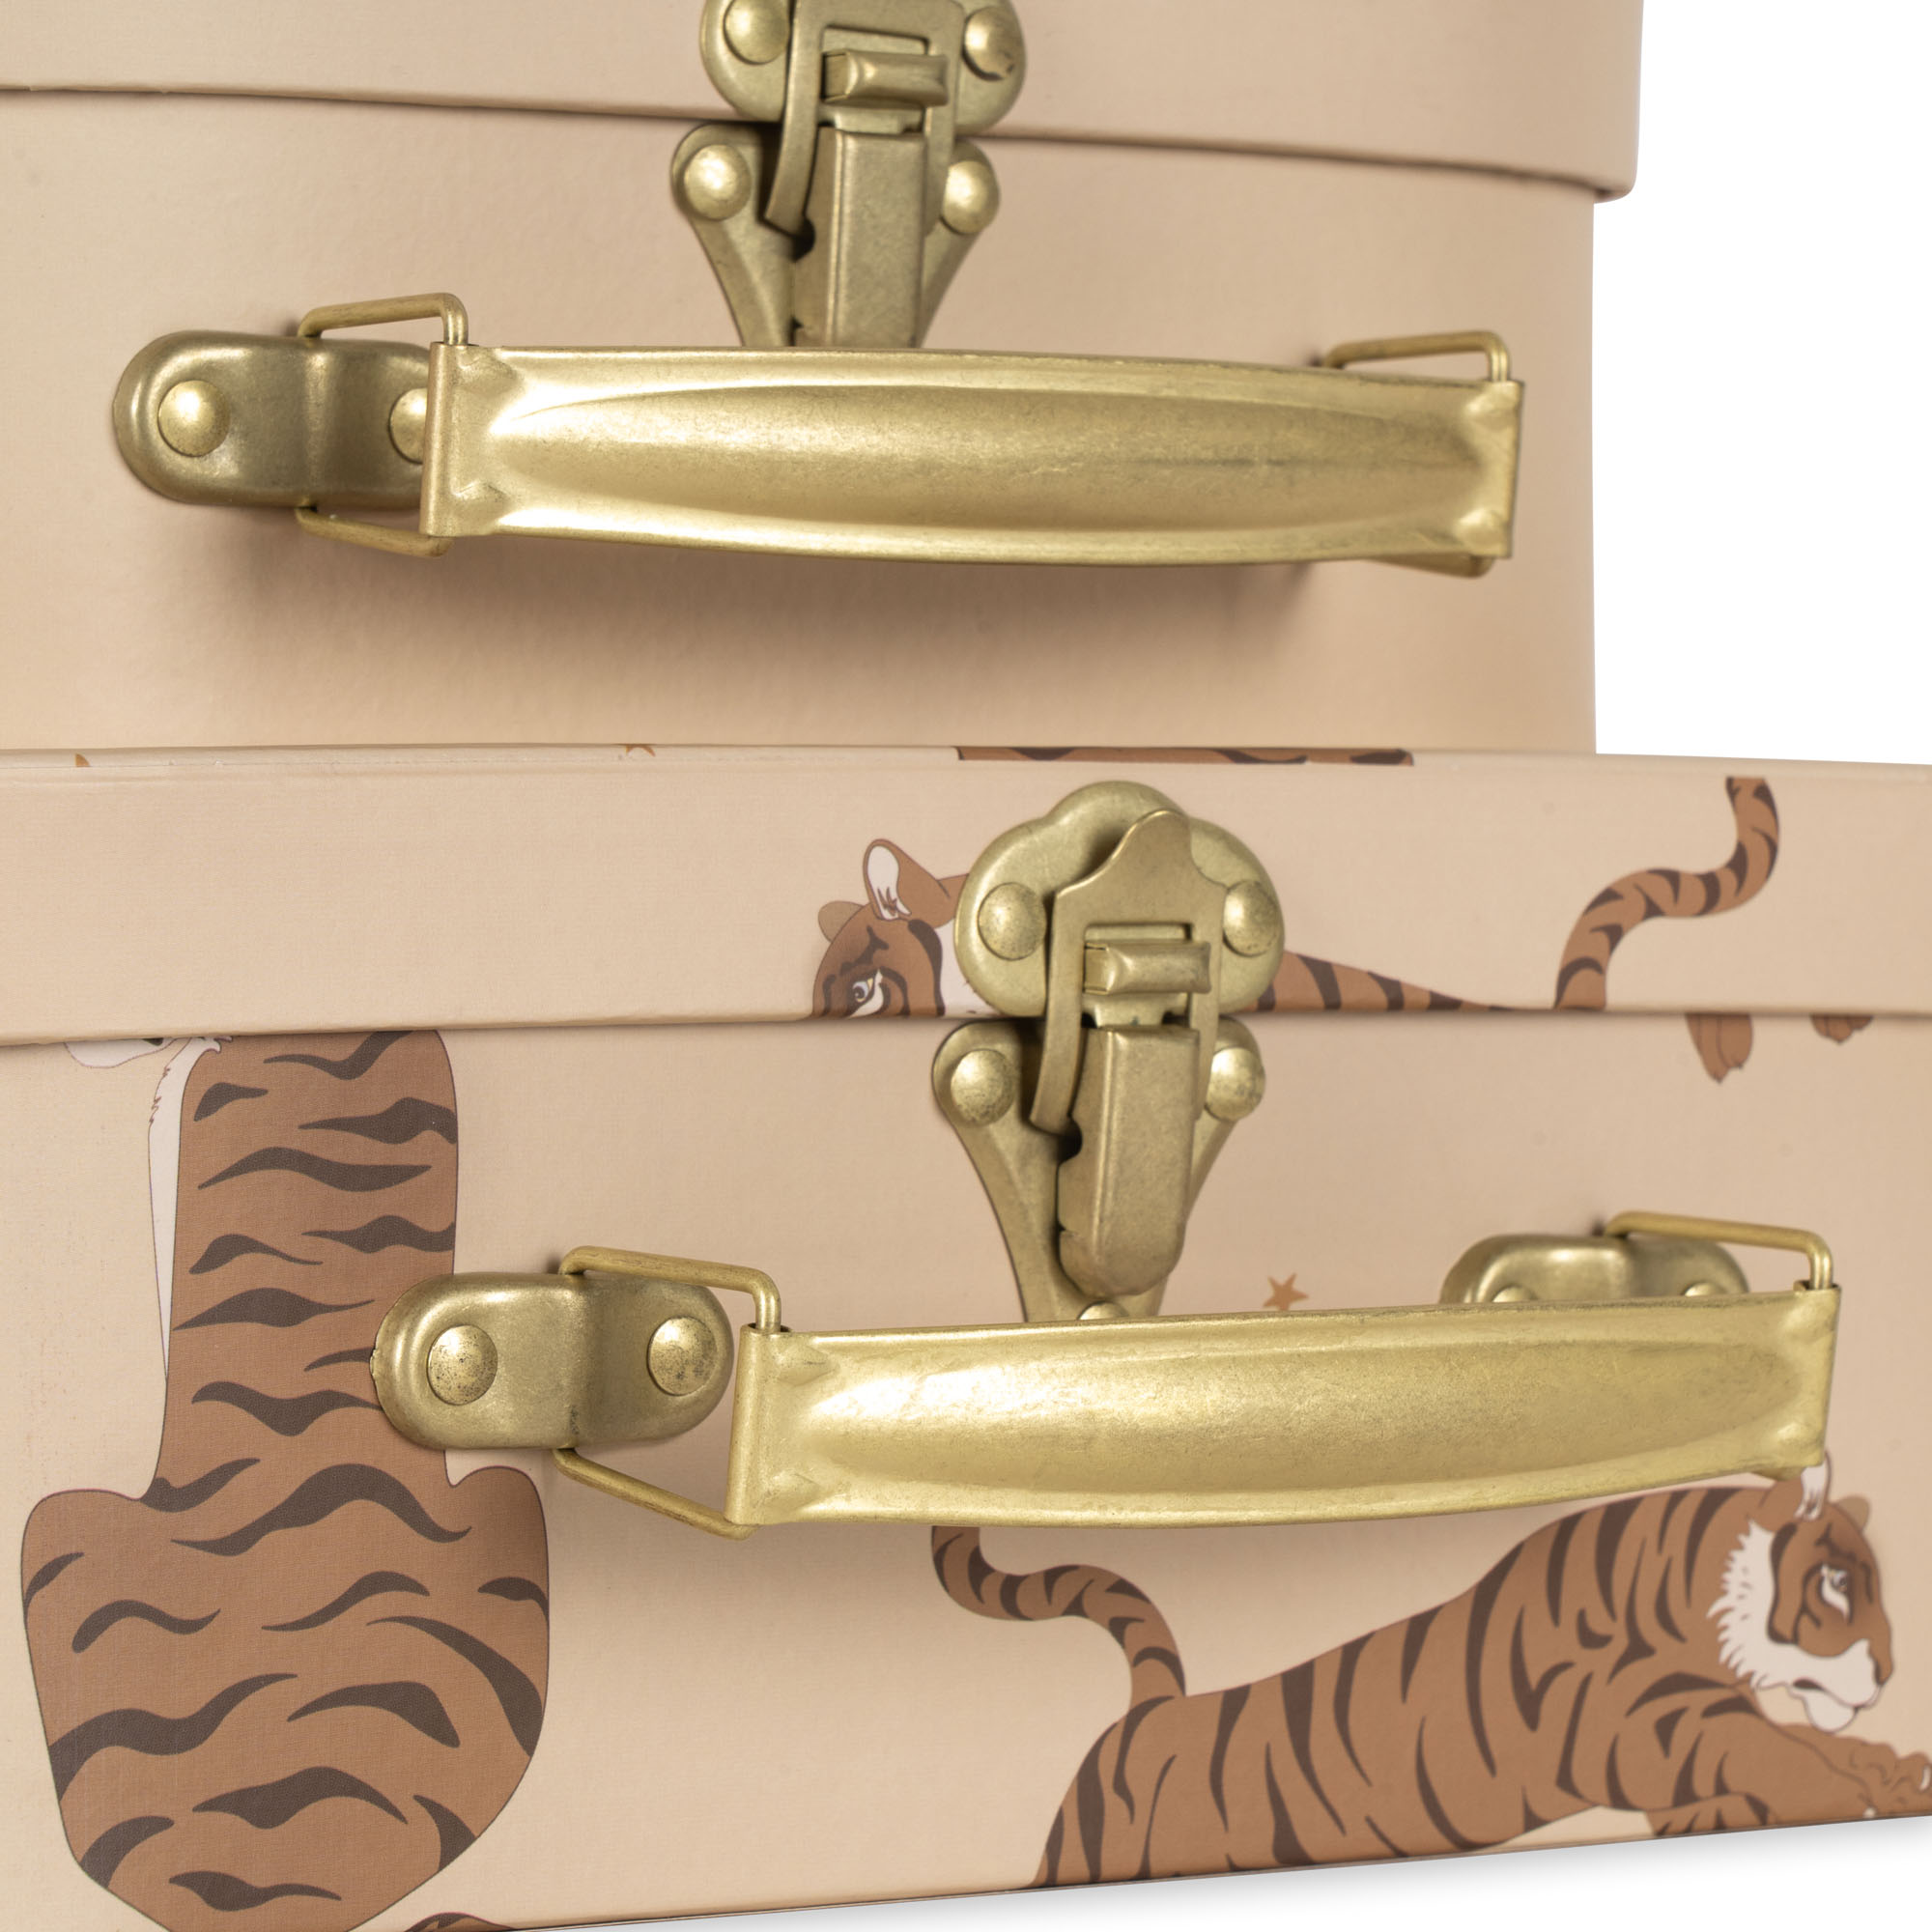 KS100715 - 2 PACK SUITCASE - TIGER SAND - Extra 9